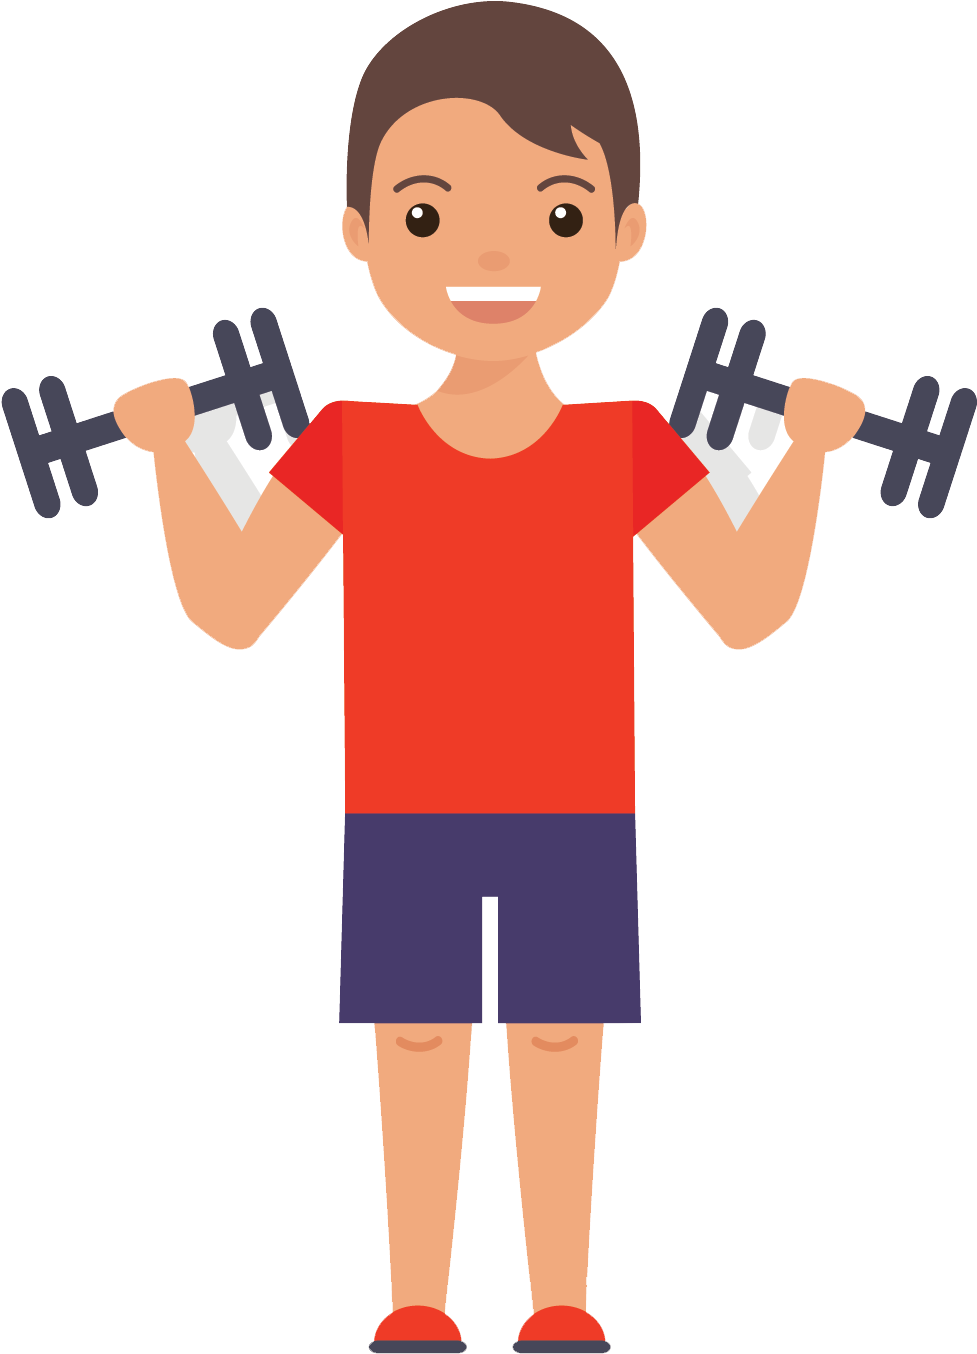 Gym Training 5 Sessions - Cartoon - (1411x1410) Png Clipart Download